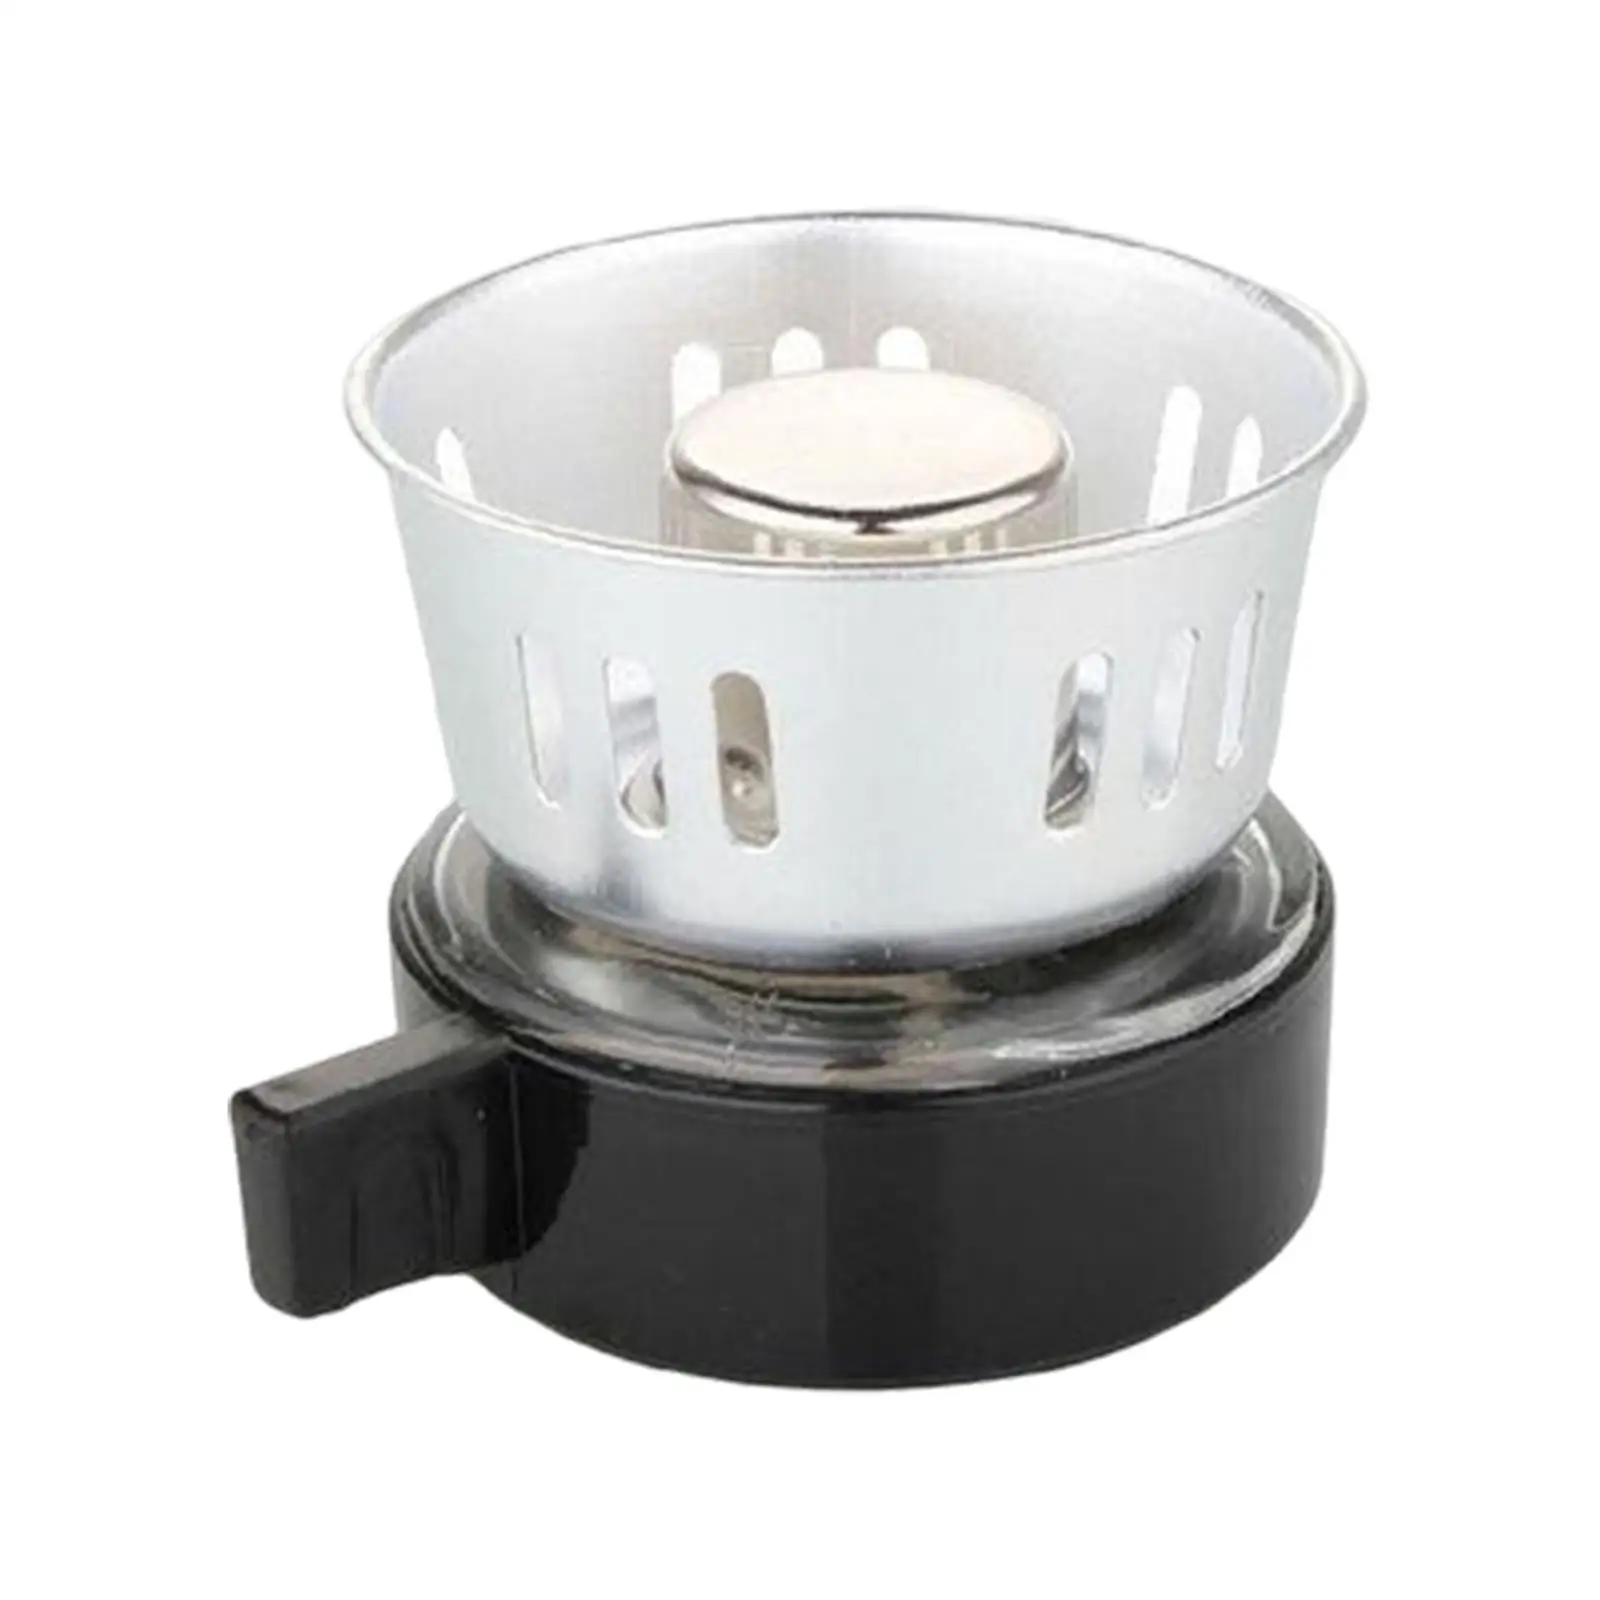 Compact Alcohol Lamp with Lamp Wick Detachable for Alcohol Stove Picnic Outdoor Hiking